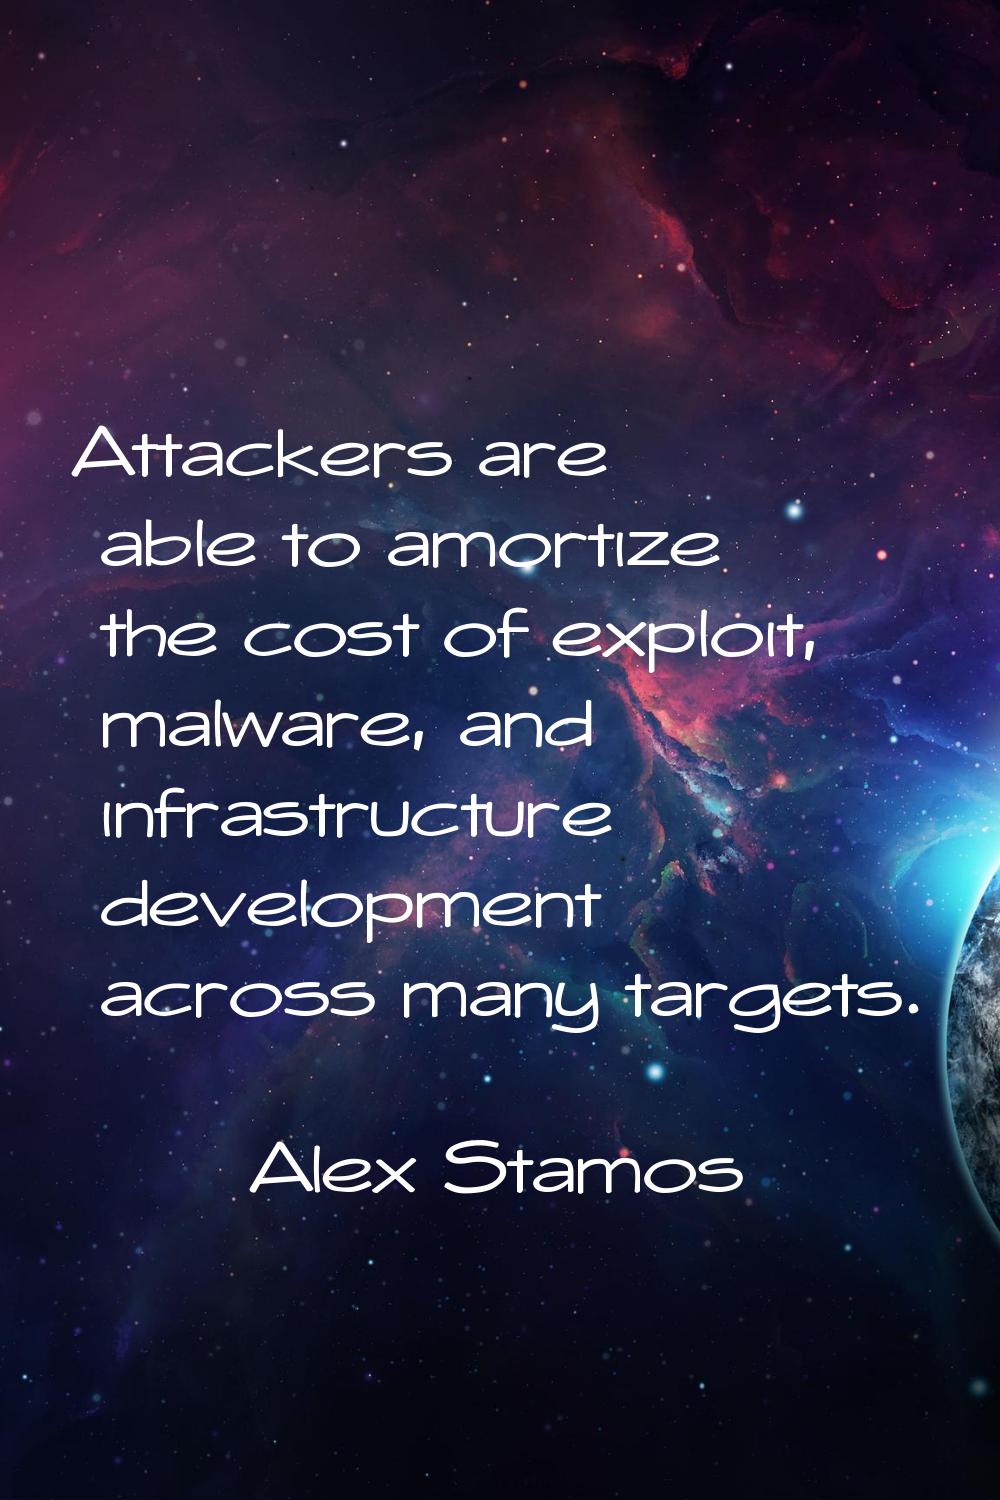 Attackers are able to amortize the cost of exploit, malware, and infrastructure development across 